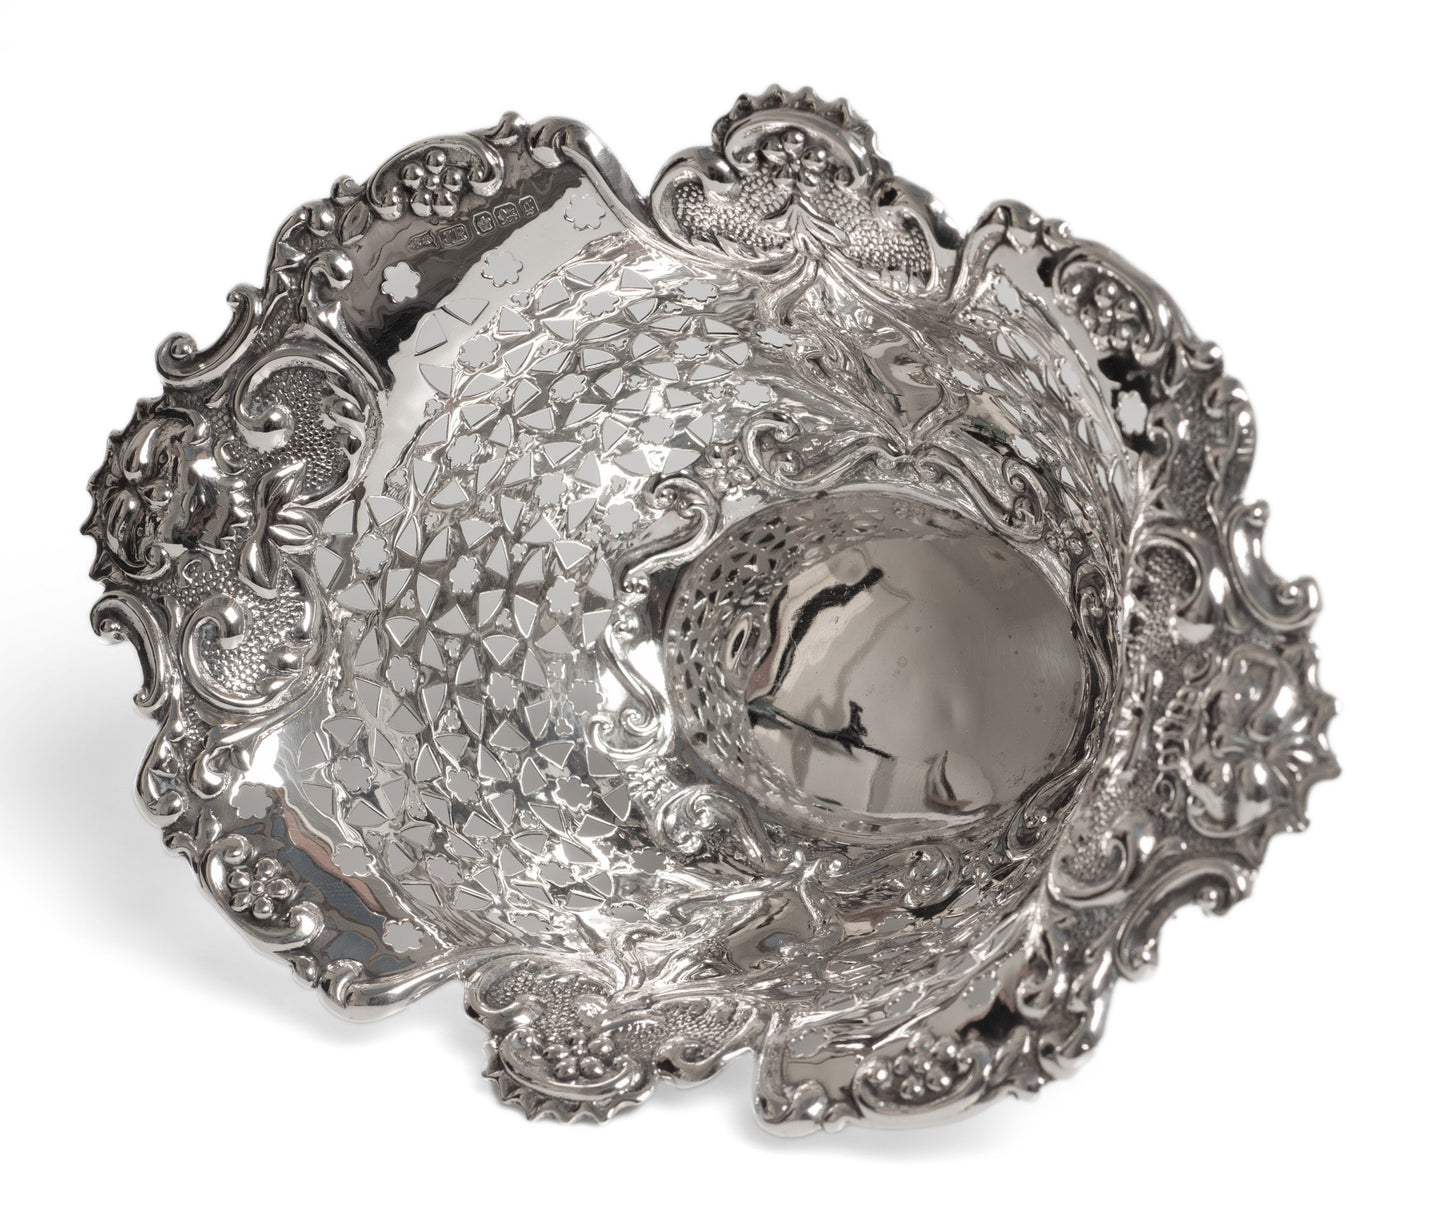 Fine Quality Victorian Silver Pierced Sweetmeat Basket by Joseph Rodgers 1899 (Code 2762)